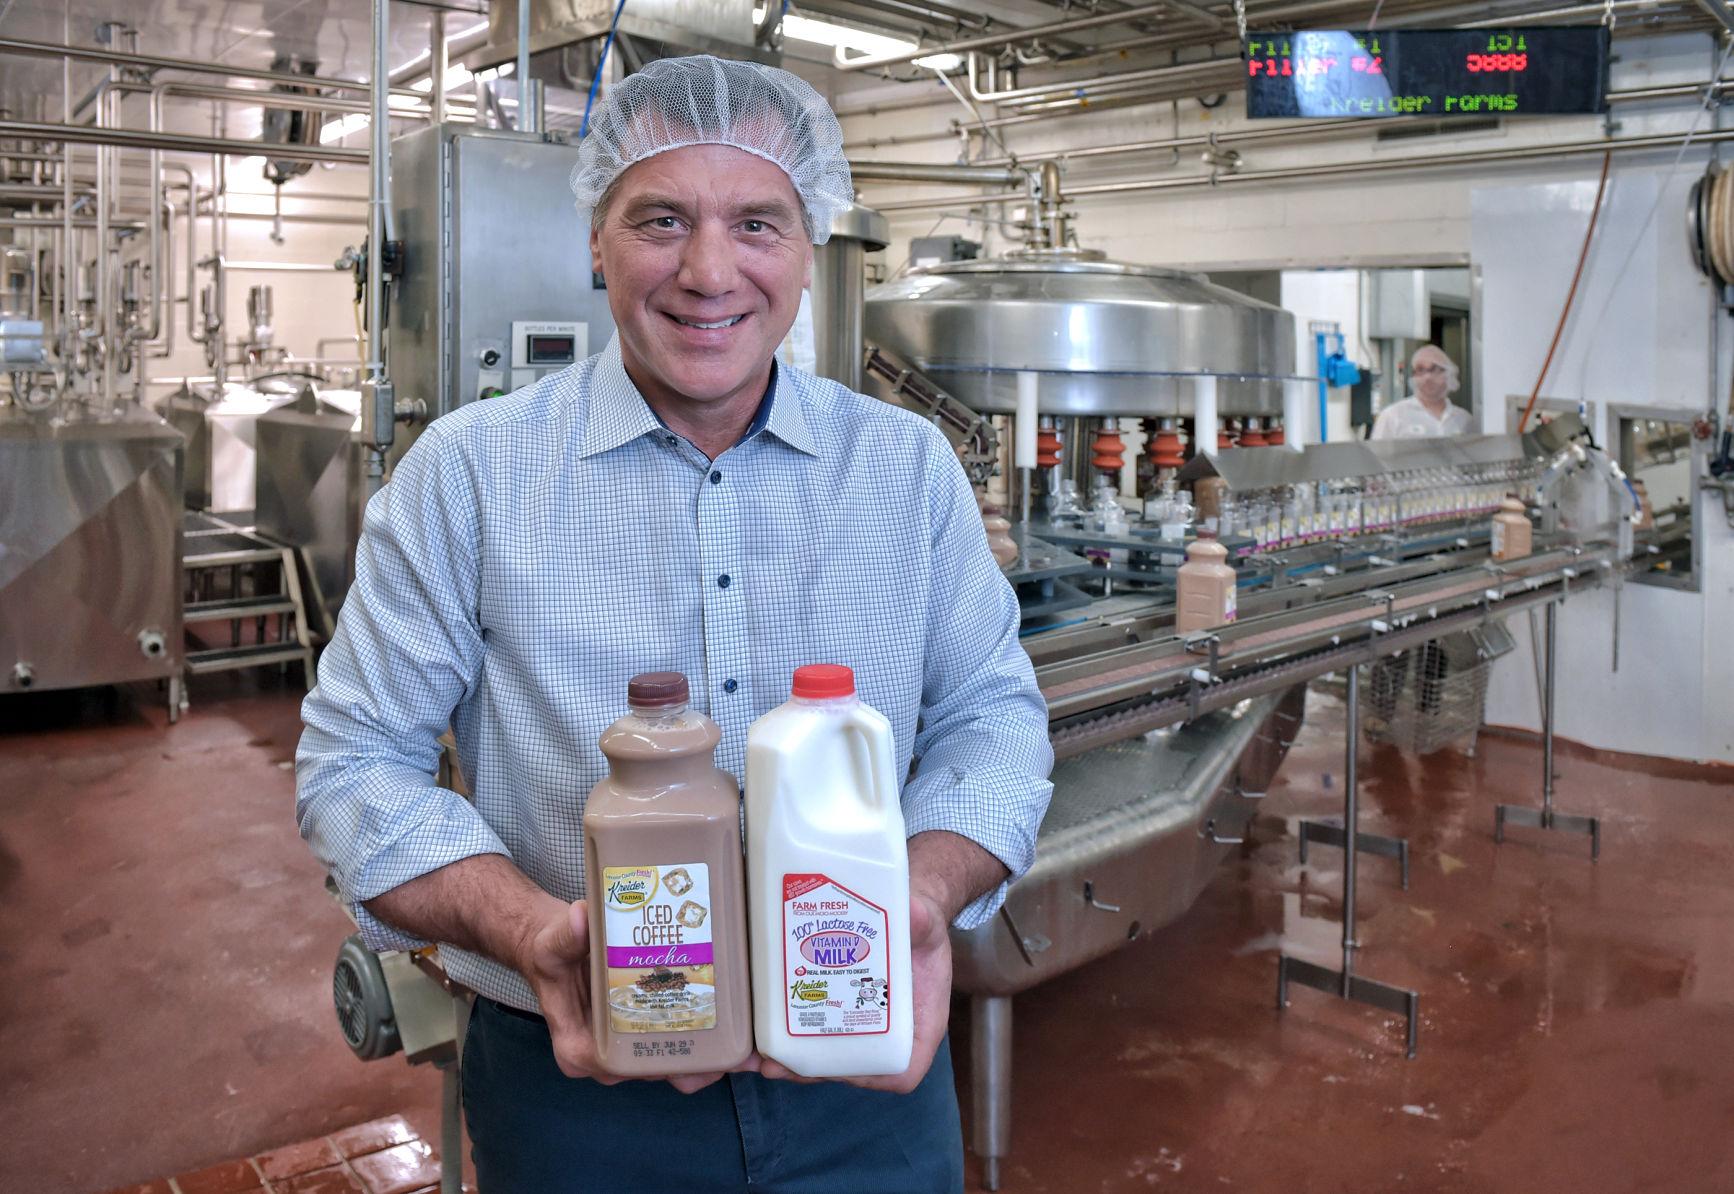 Kreider Farms gets 98,000 state grant for marketing its lactosefree